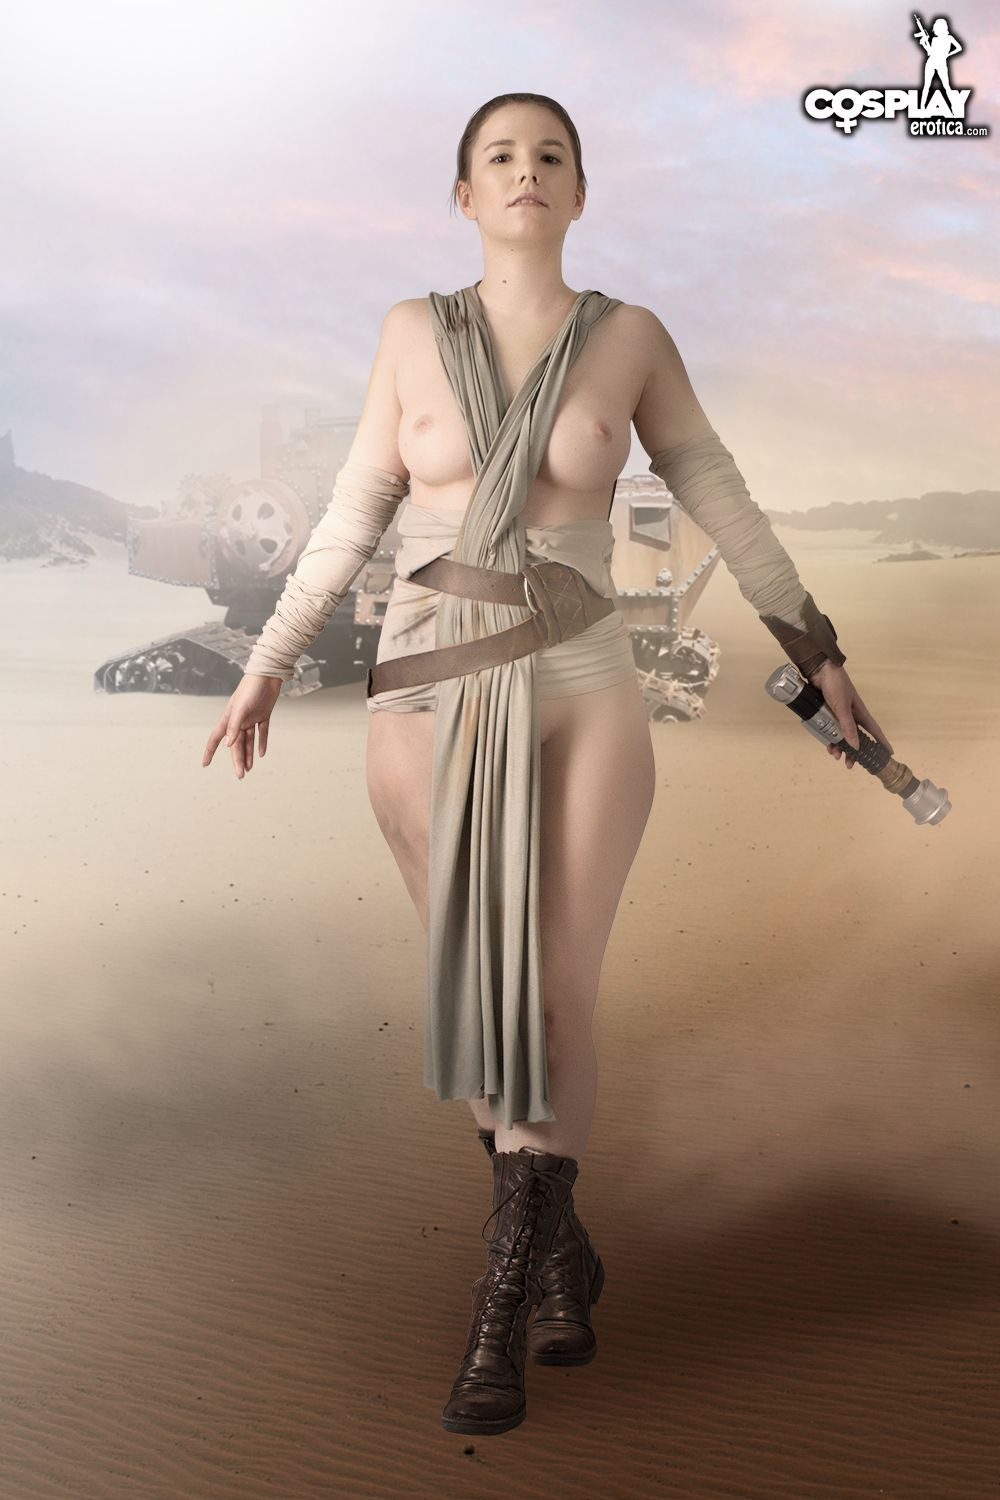 Cassie - Galactic Empire shows free gallery picture 29-0029